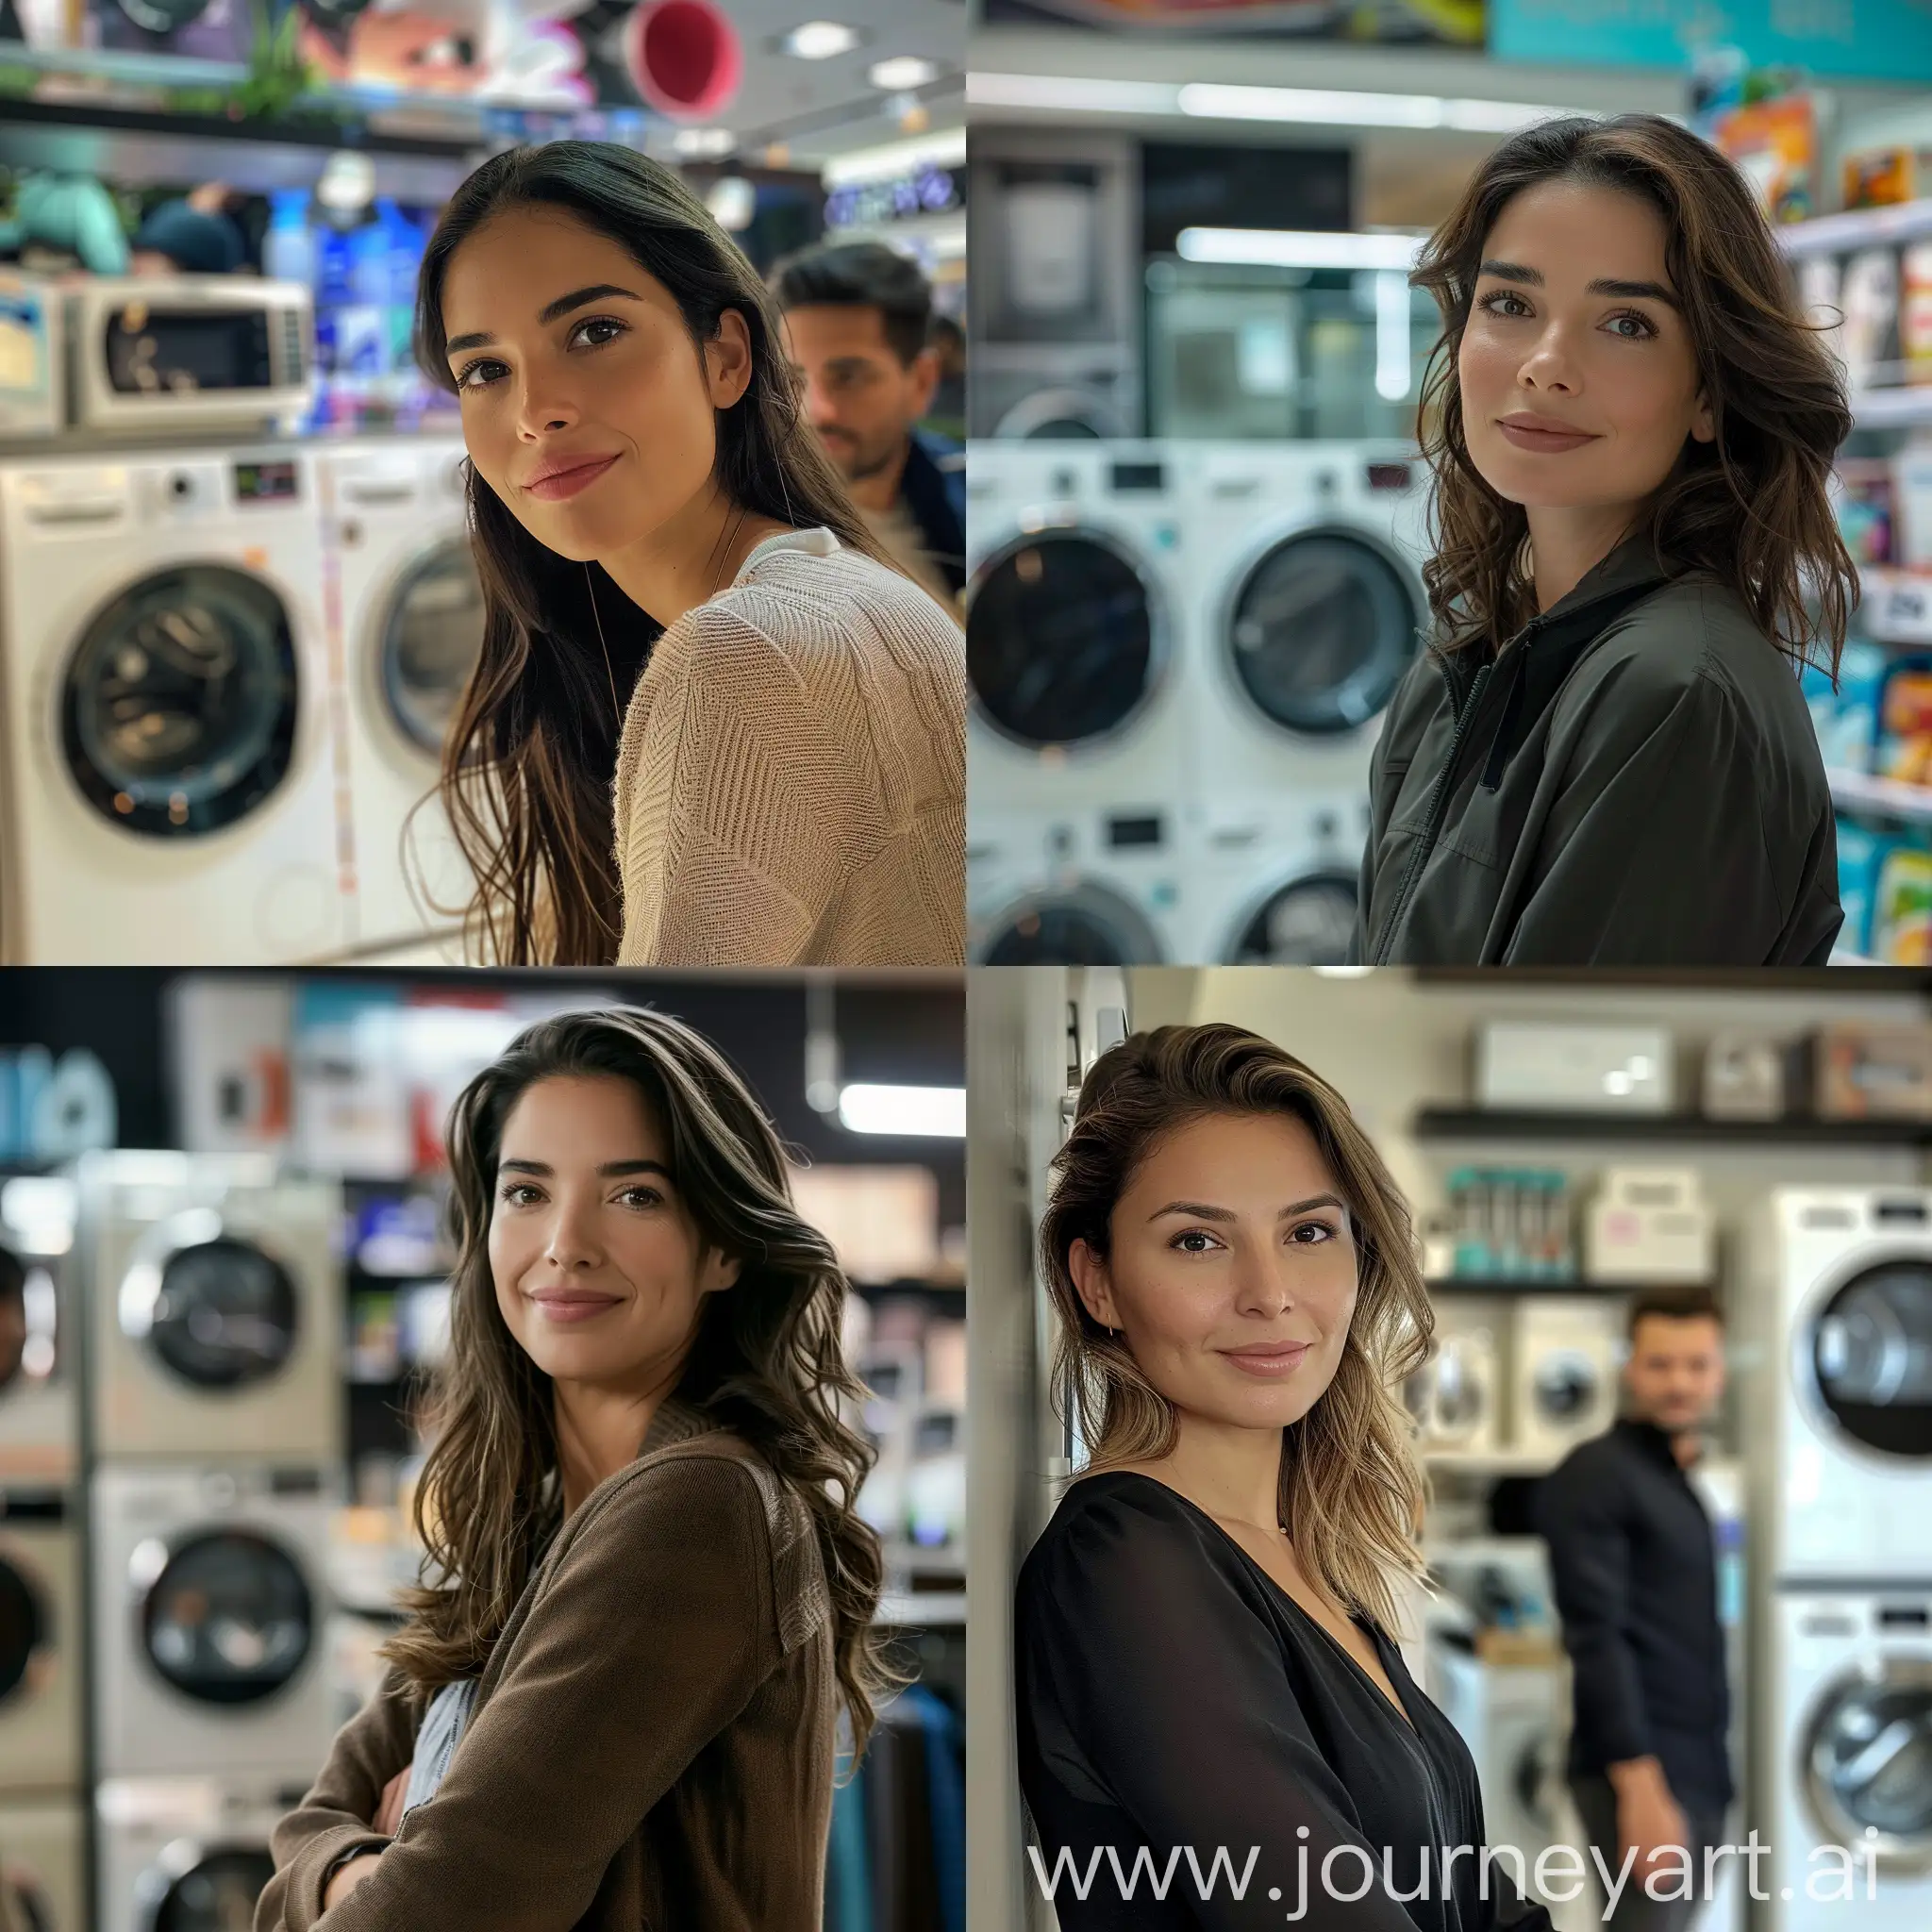 Ana-de-Armas-Smiles-While-Waiting-in-Home-Appliance-Store